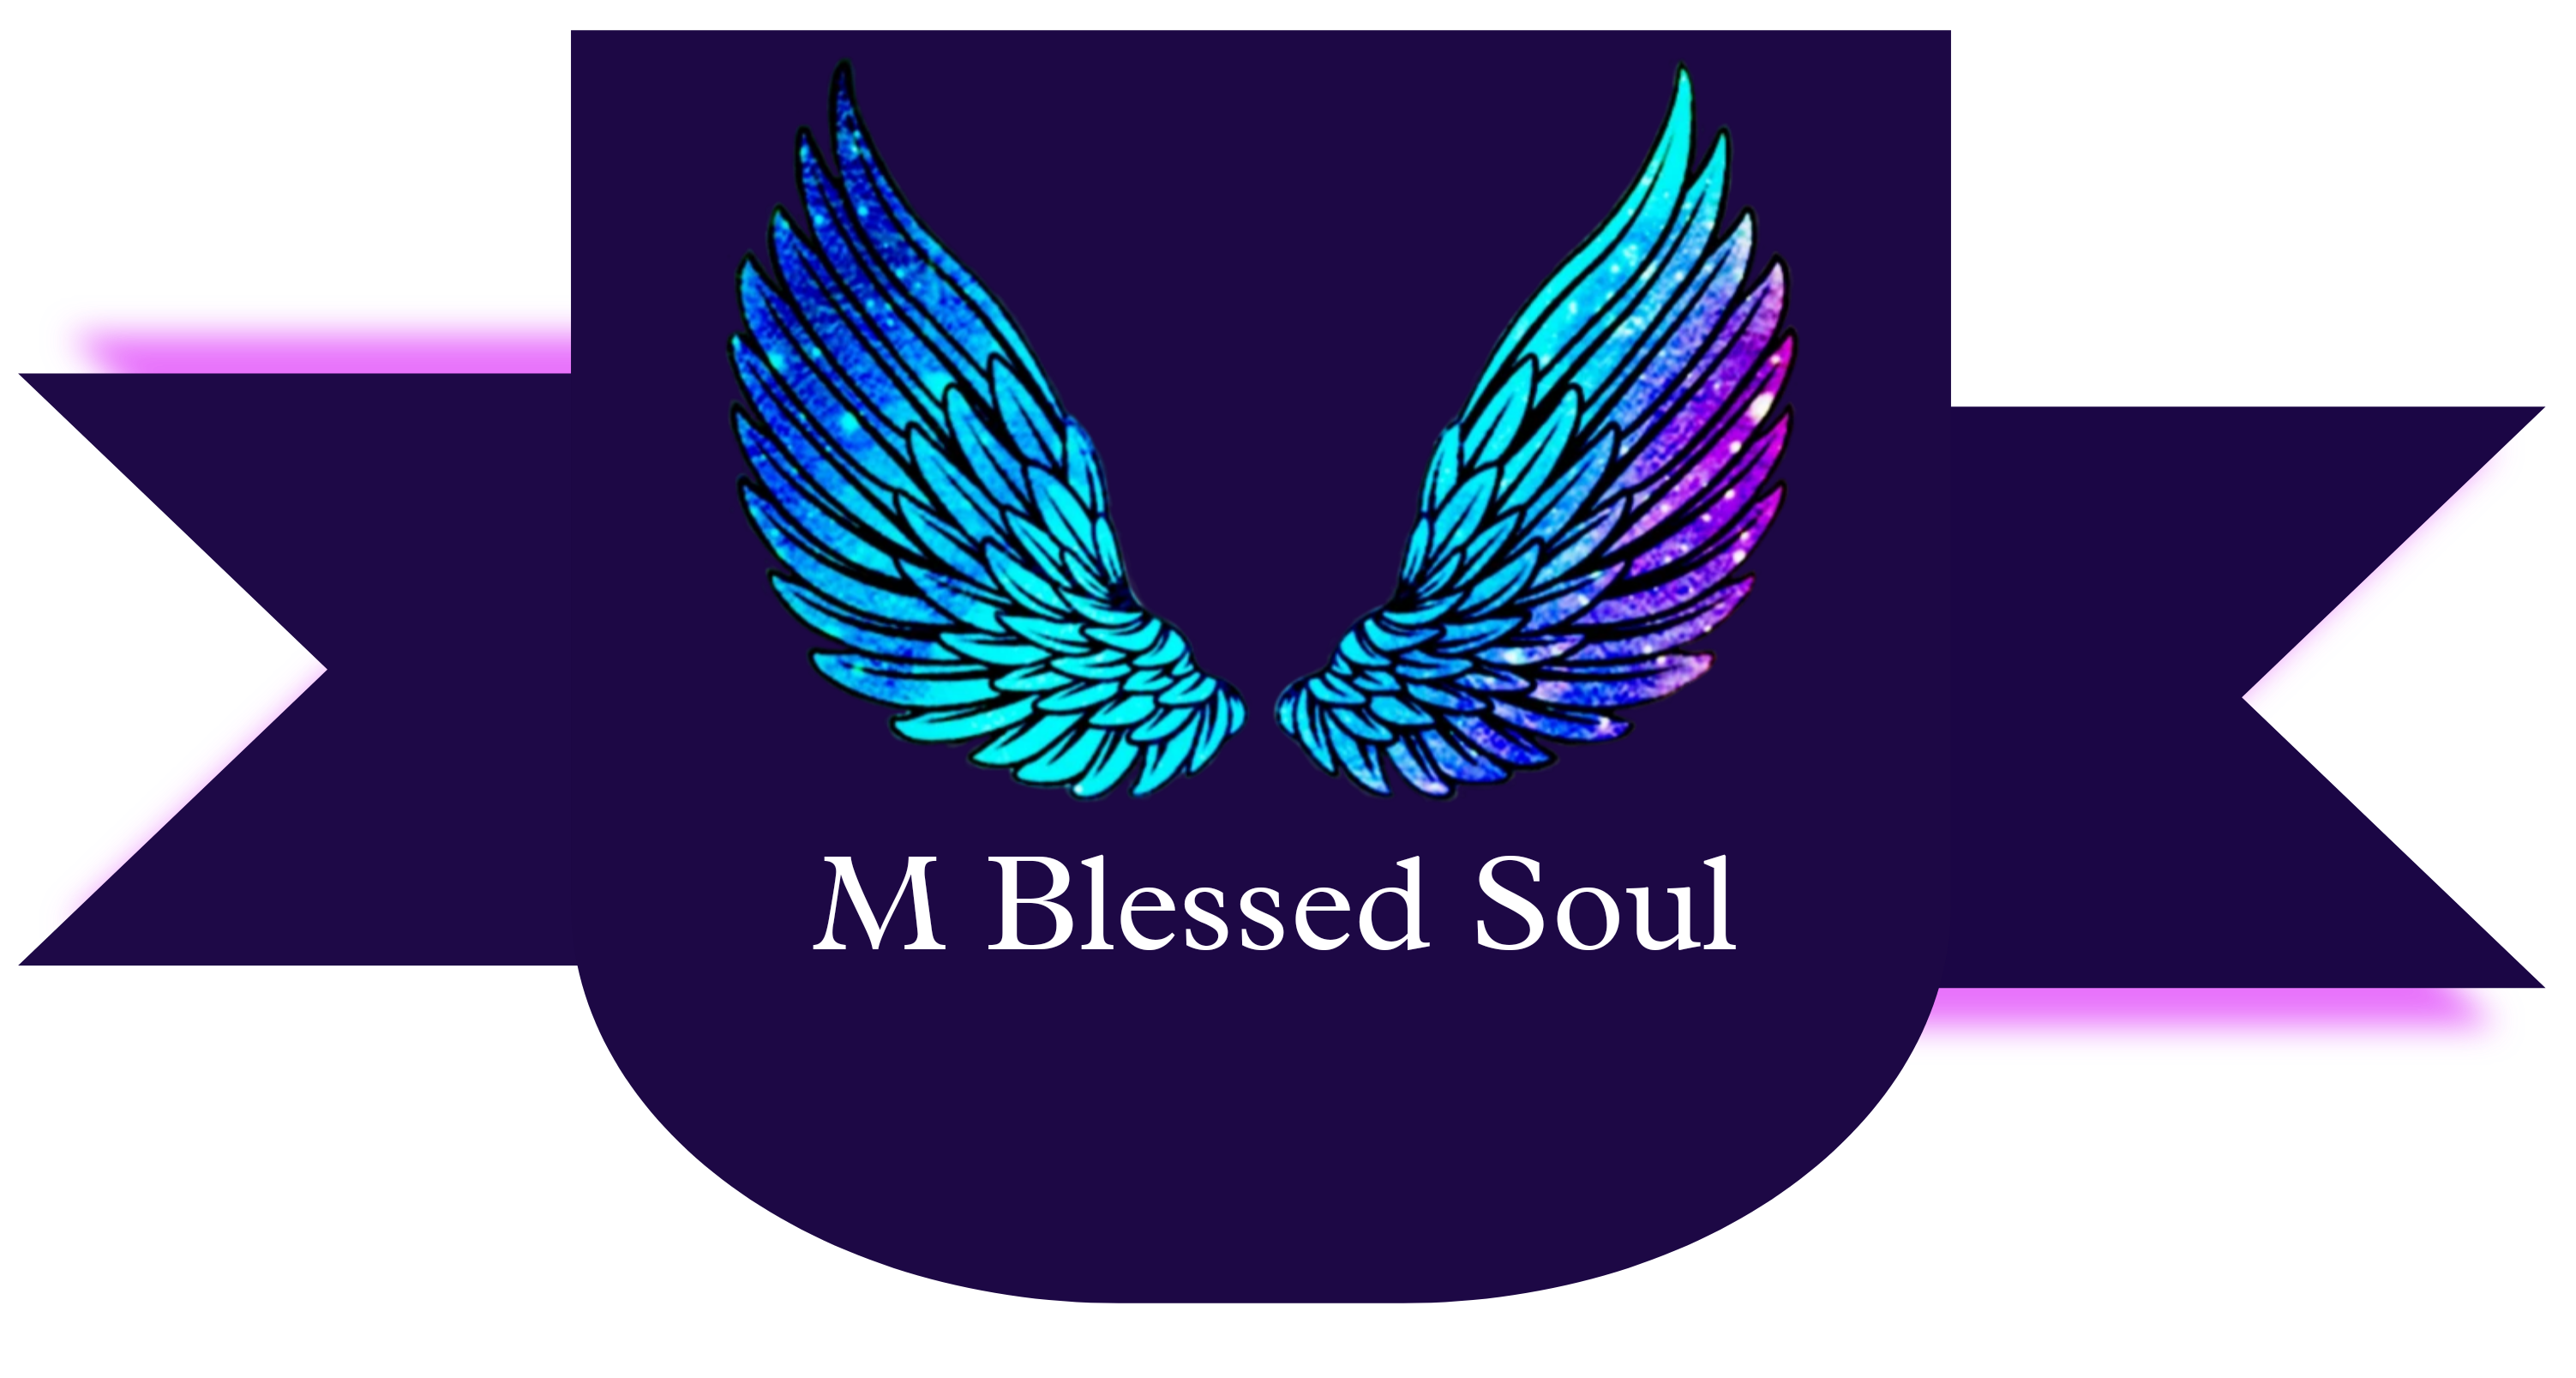 M Blessed Soul